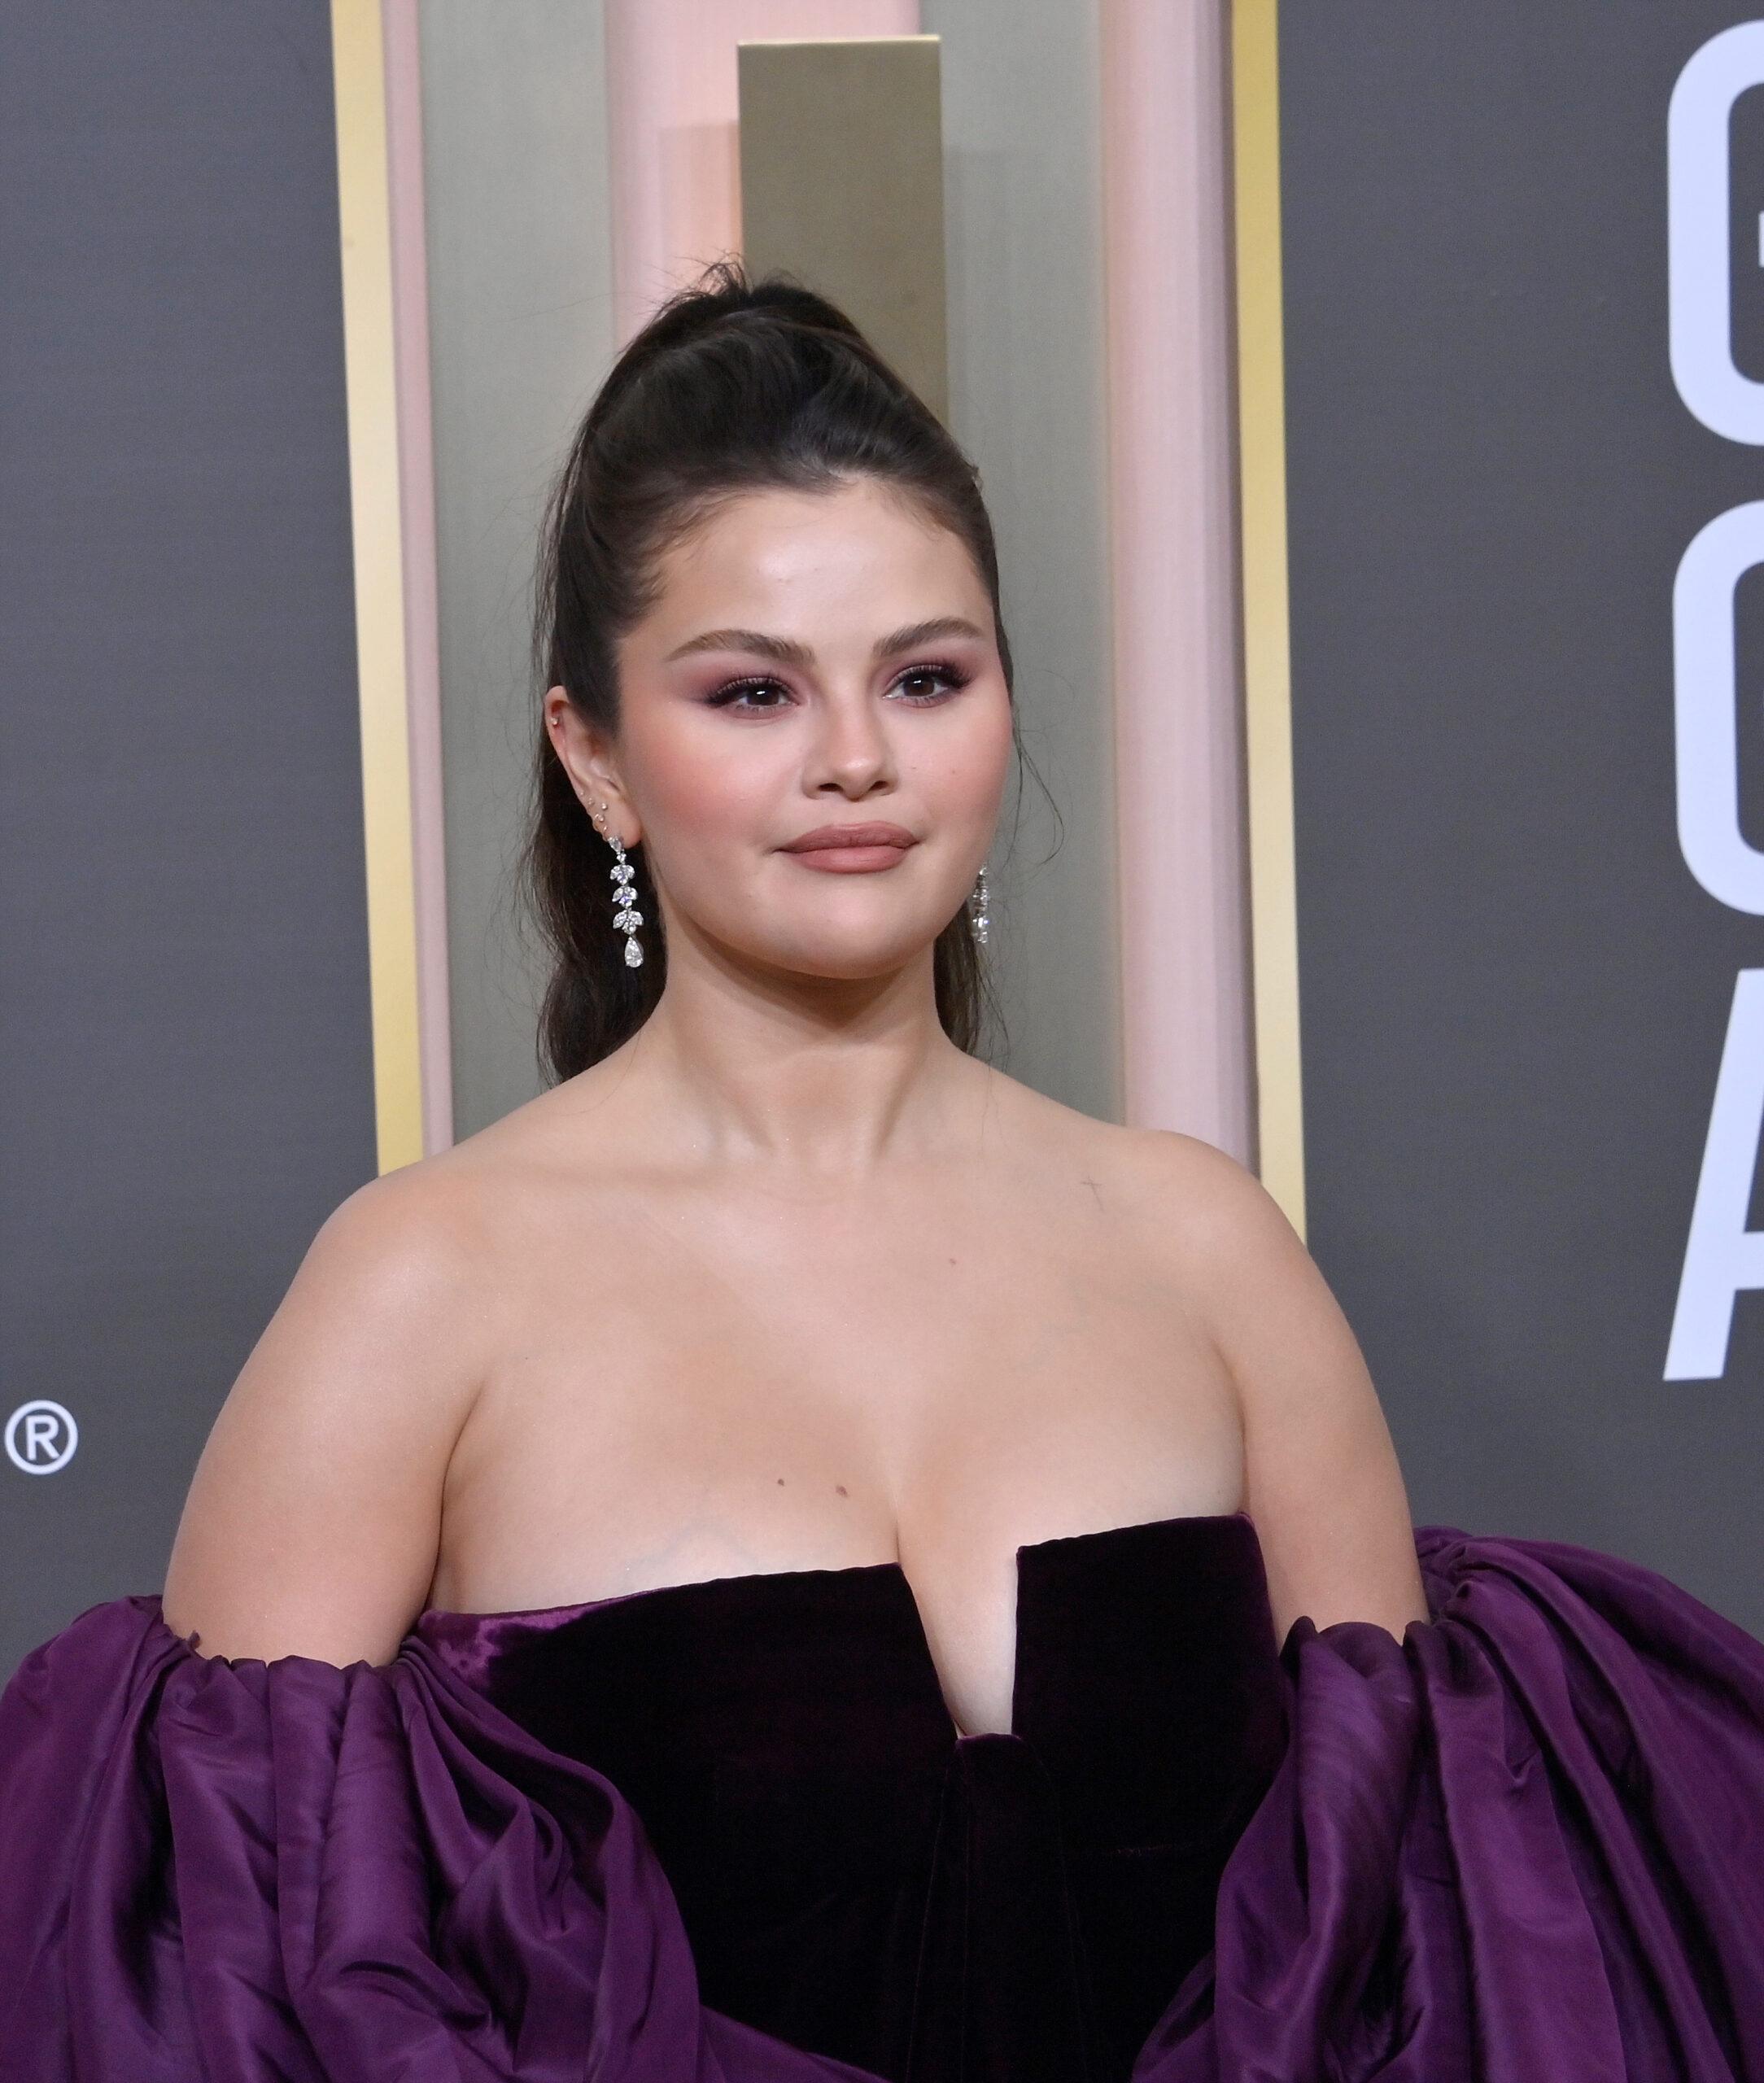 Selena Gomez Attends the Golden Globe Awards in Beverly Hills